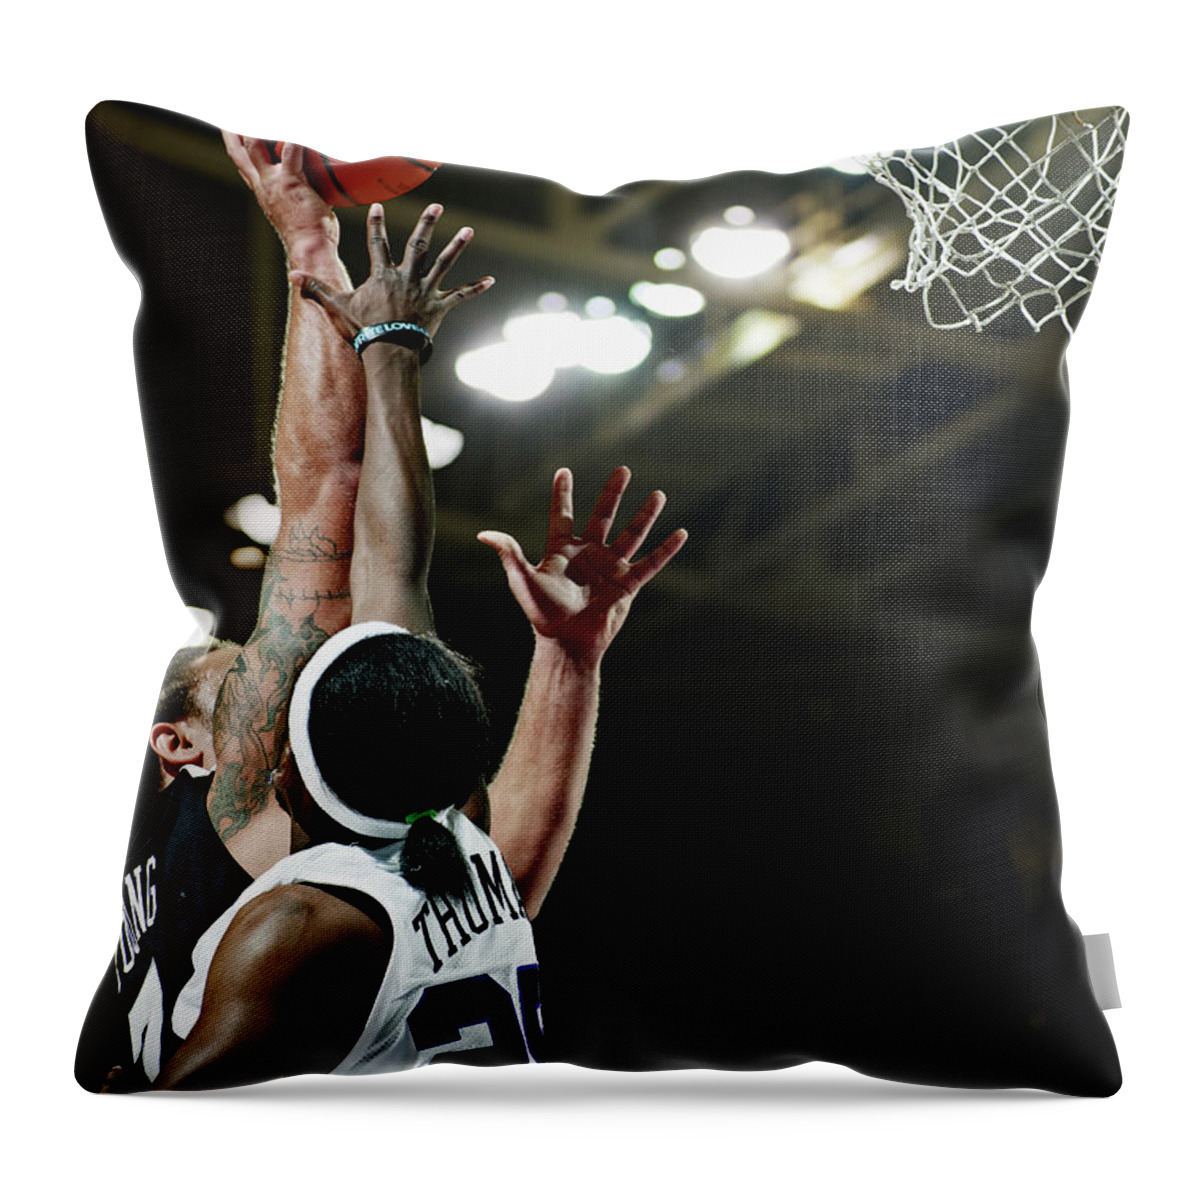 Young Men Throw Pillow featuring the photograph Basketball Player Dunking The Ball Over by Thomas Barwick